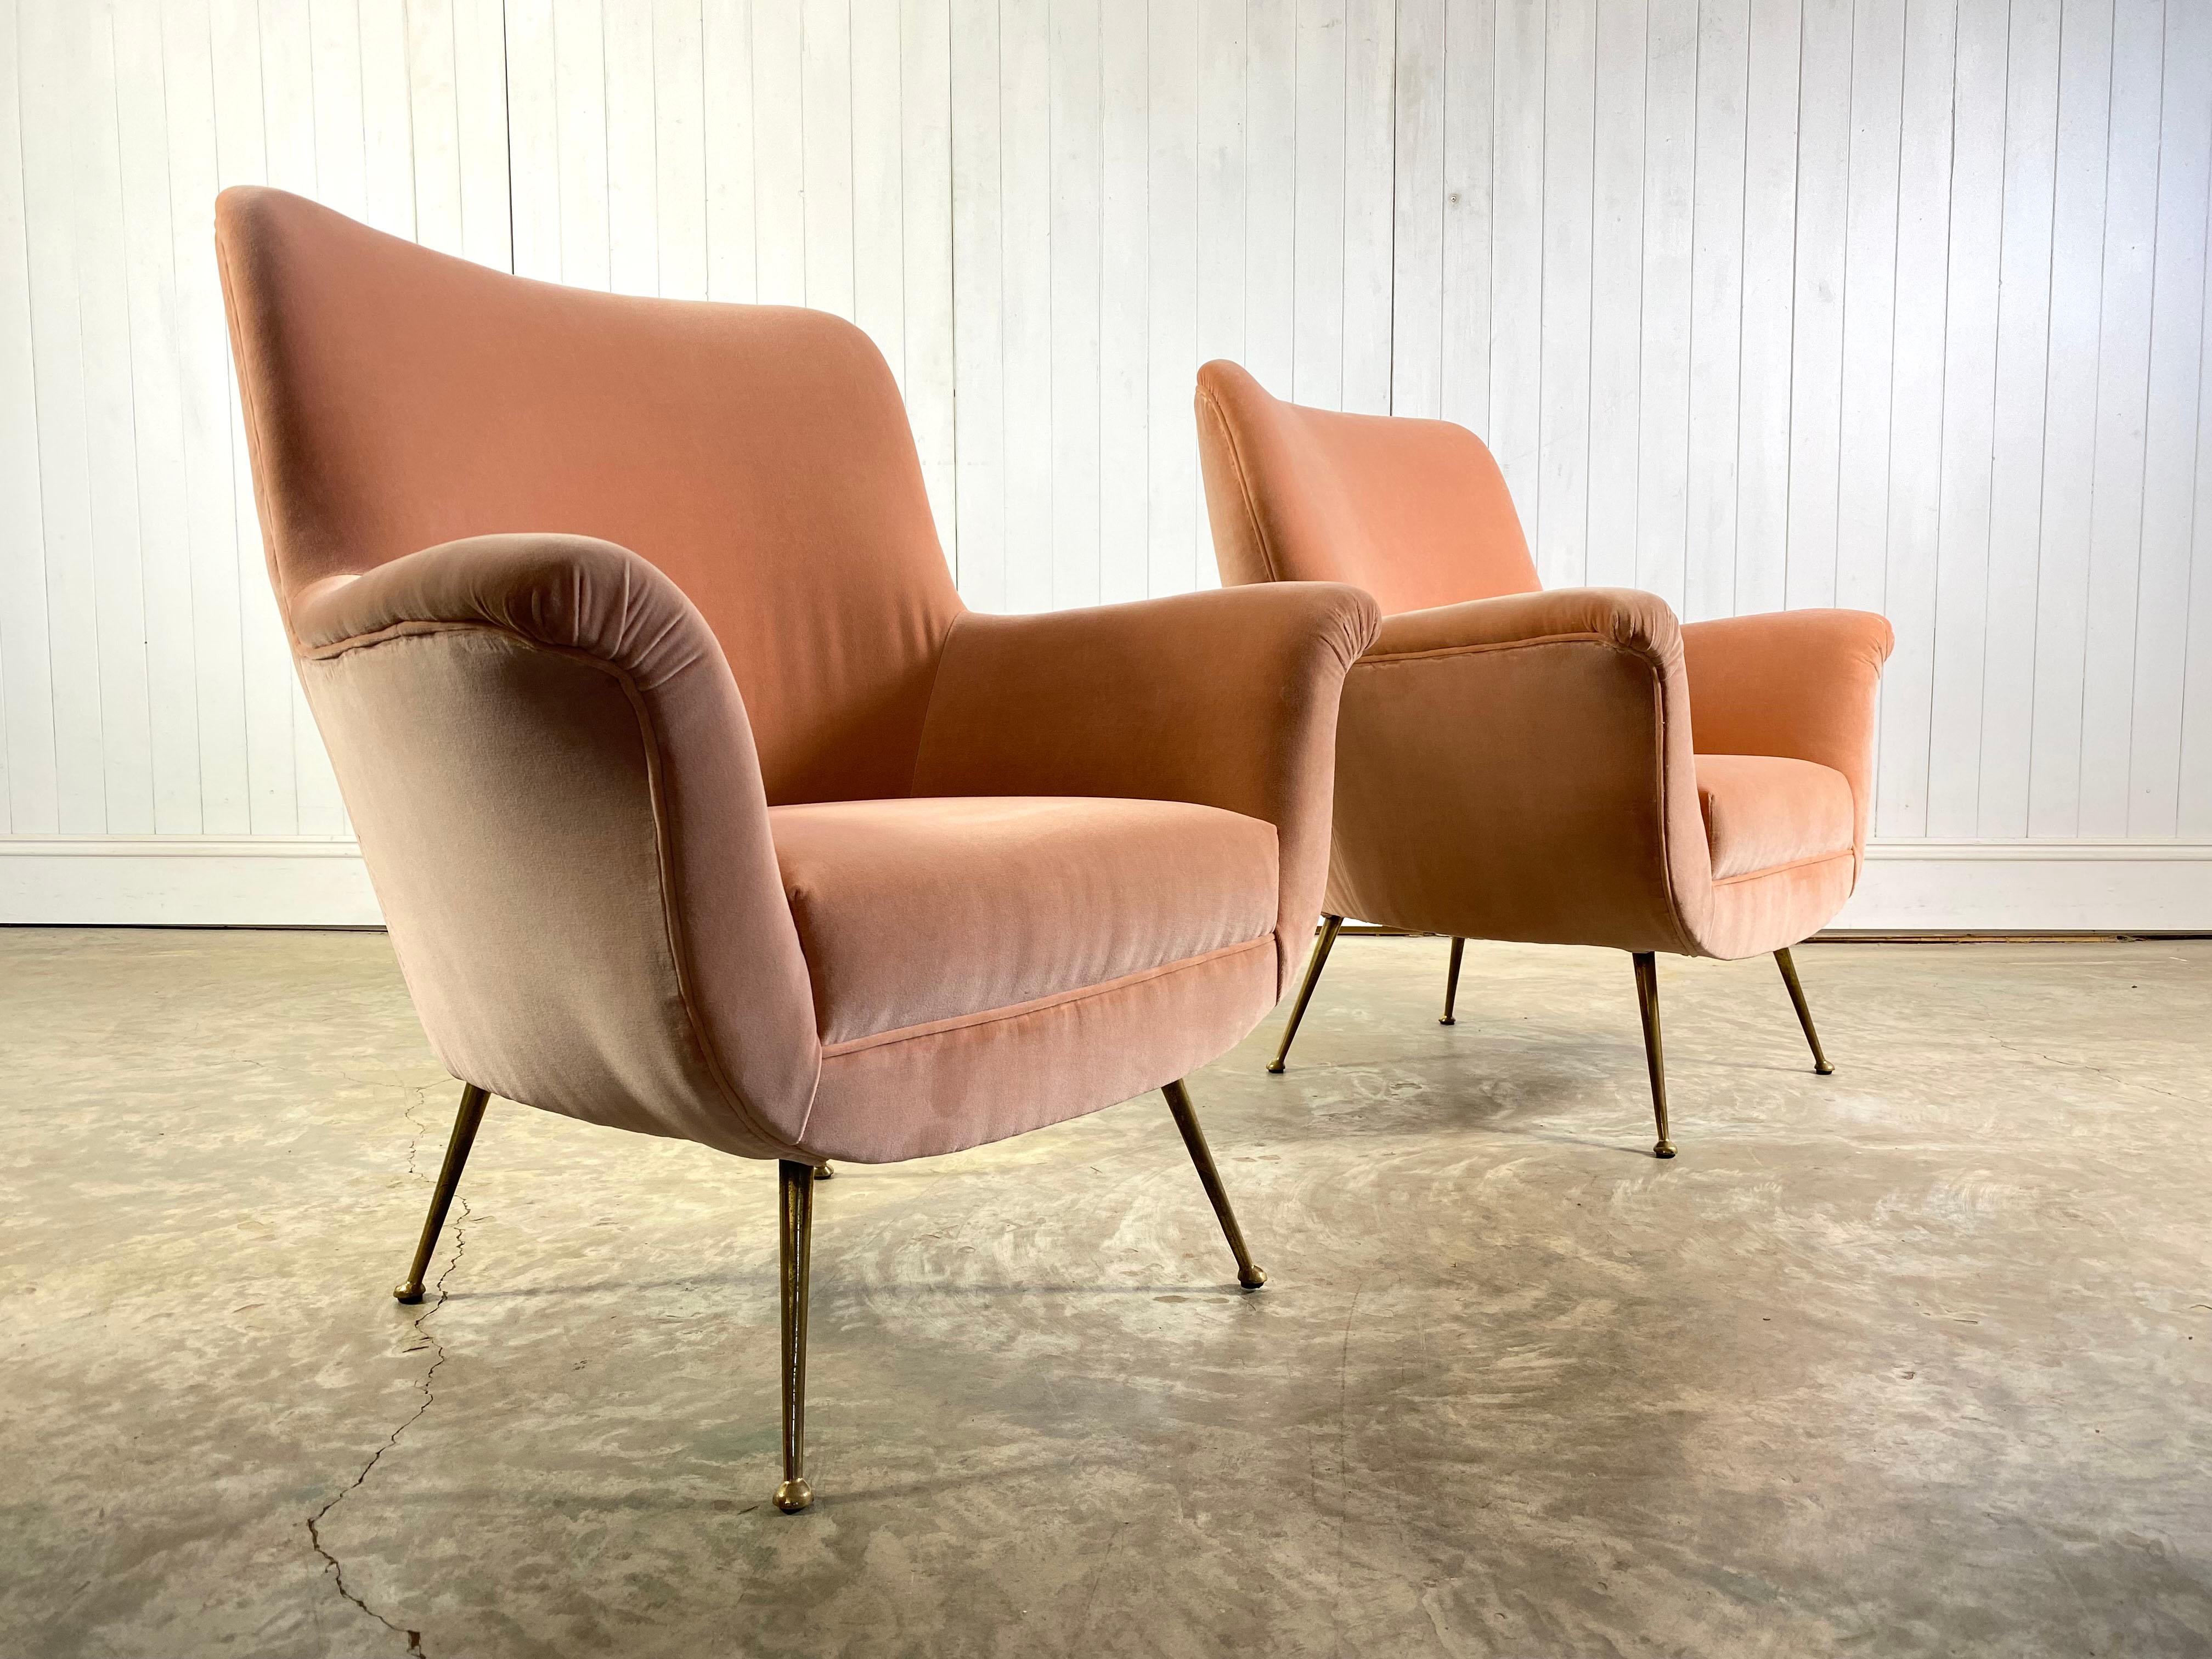 This stunning rose-pink-blush midcentury armchair was sourced in Italy, circa 1950s.

This has been fully re-upholstered in this fantastic colour and the legs are original in brass with some patina.

A classic midcentury shape.